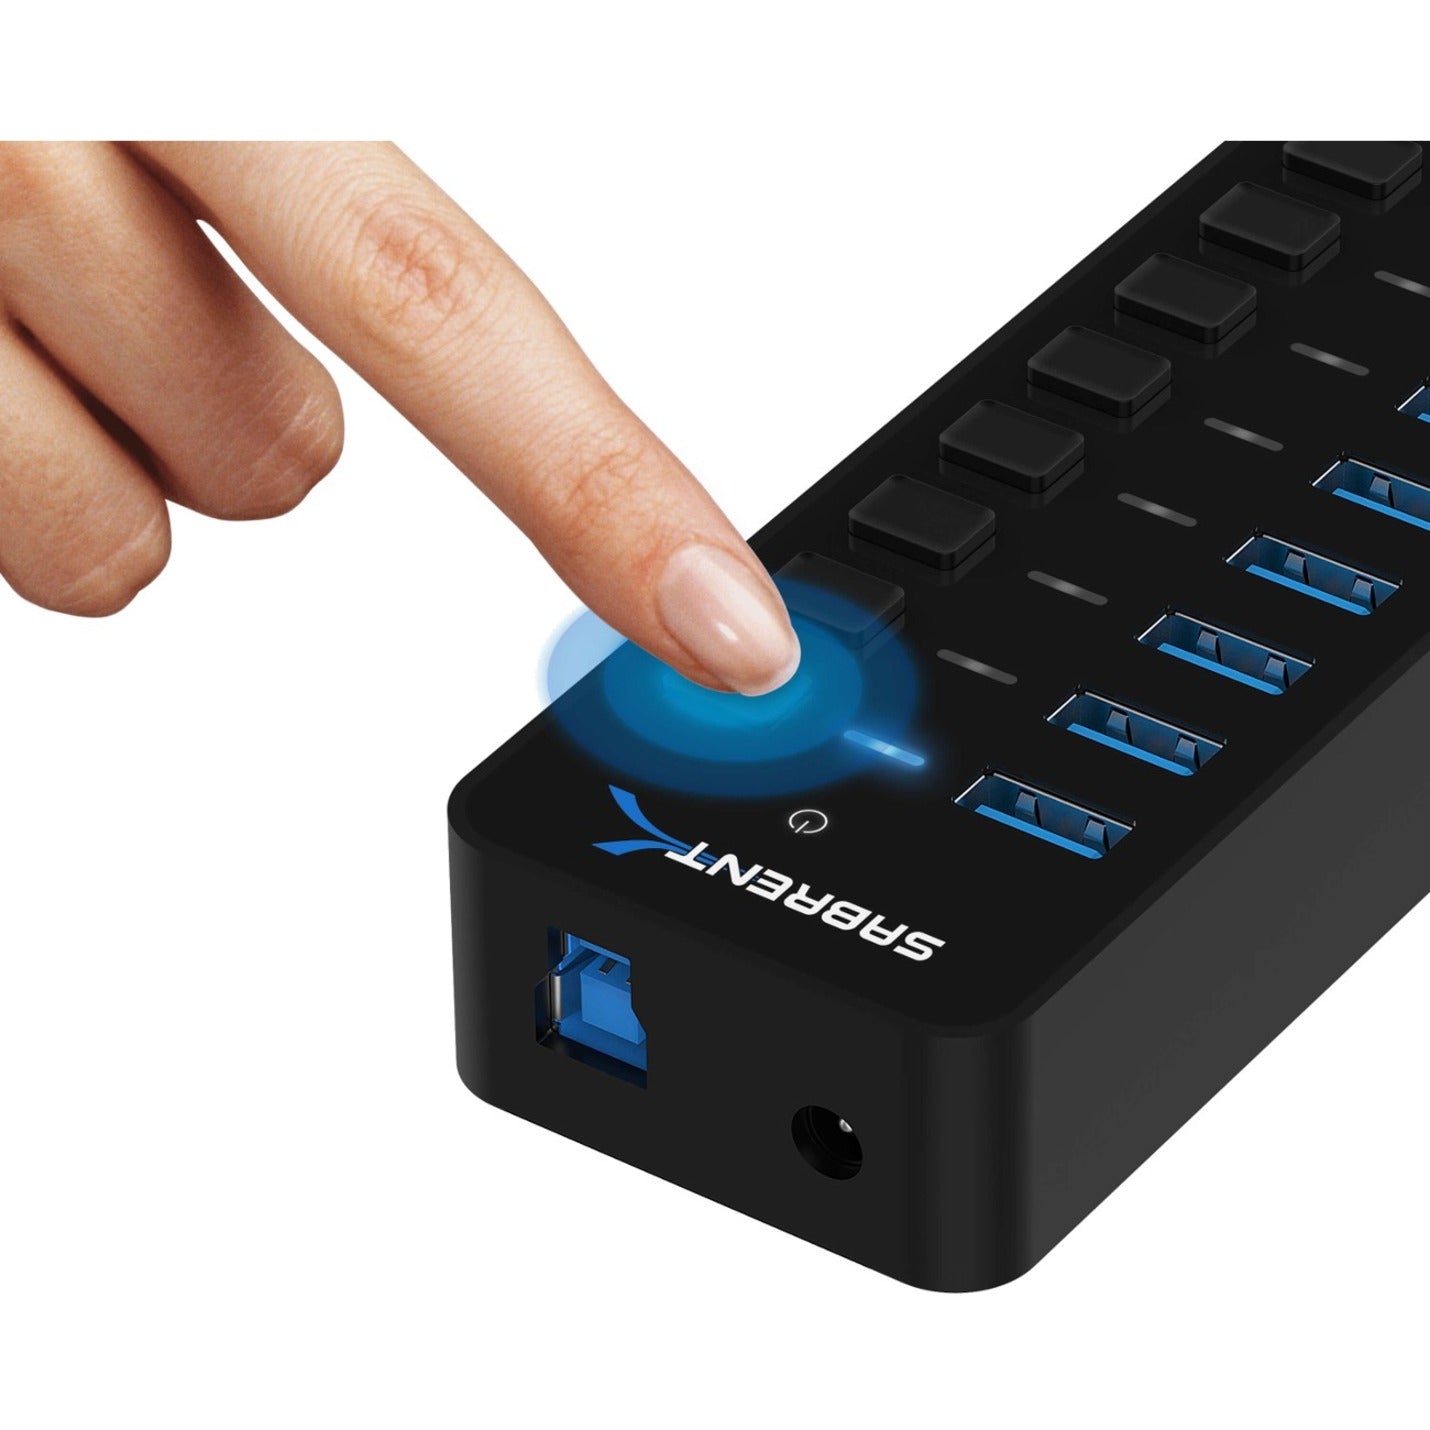 Sabrent HB-B7C3 7 USB 3.0 Port + 3 Smart Charging Ports Hub, High-Speed Data Transfer and Fast Charging for Your Devices